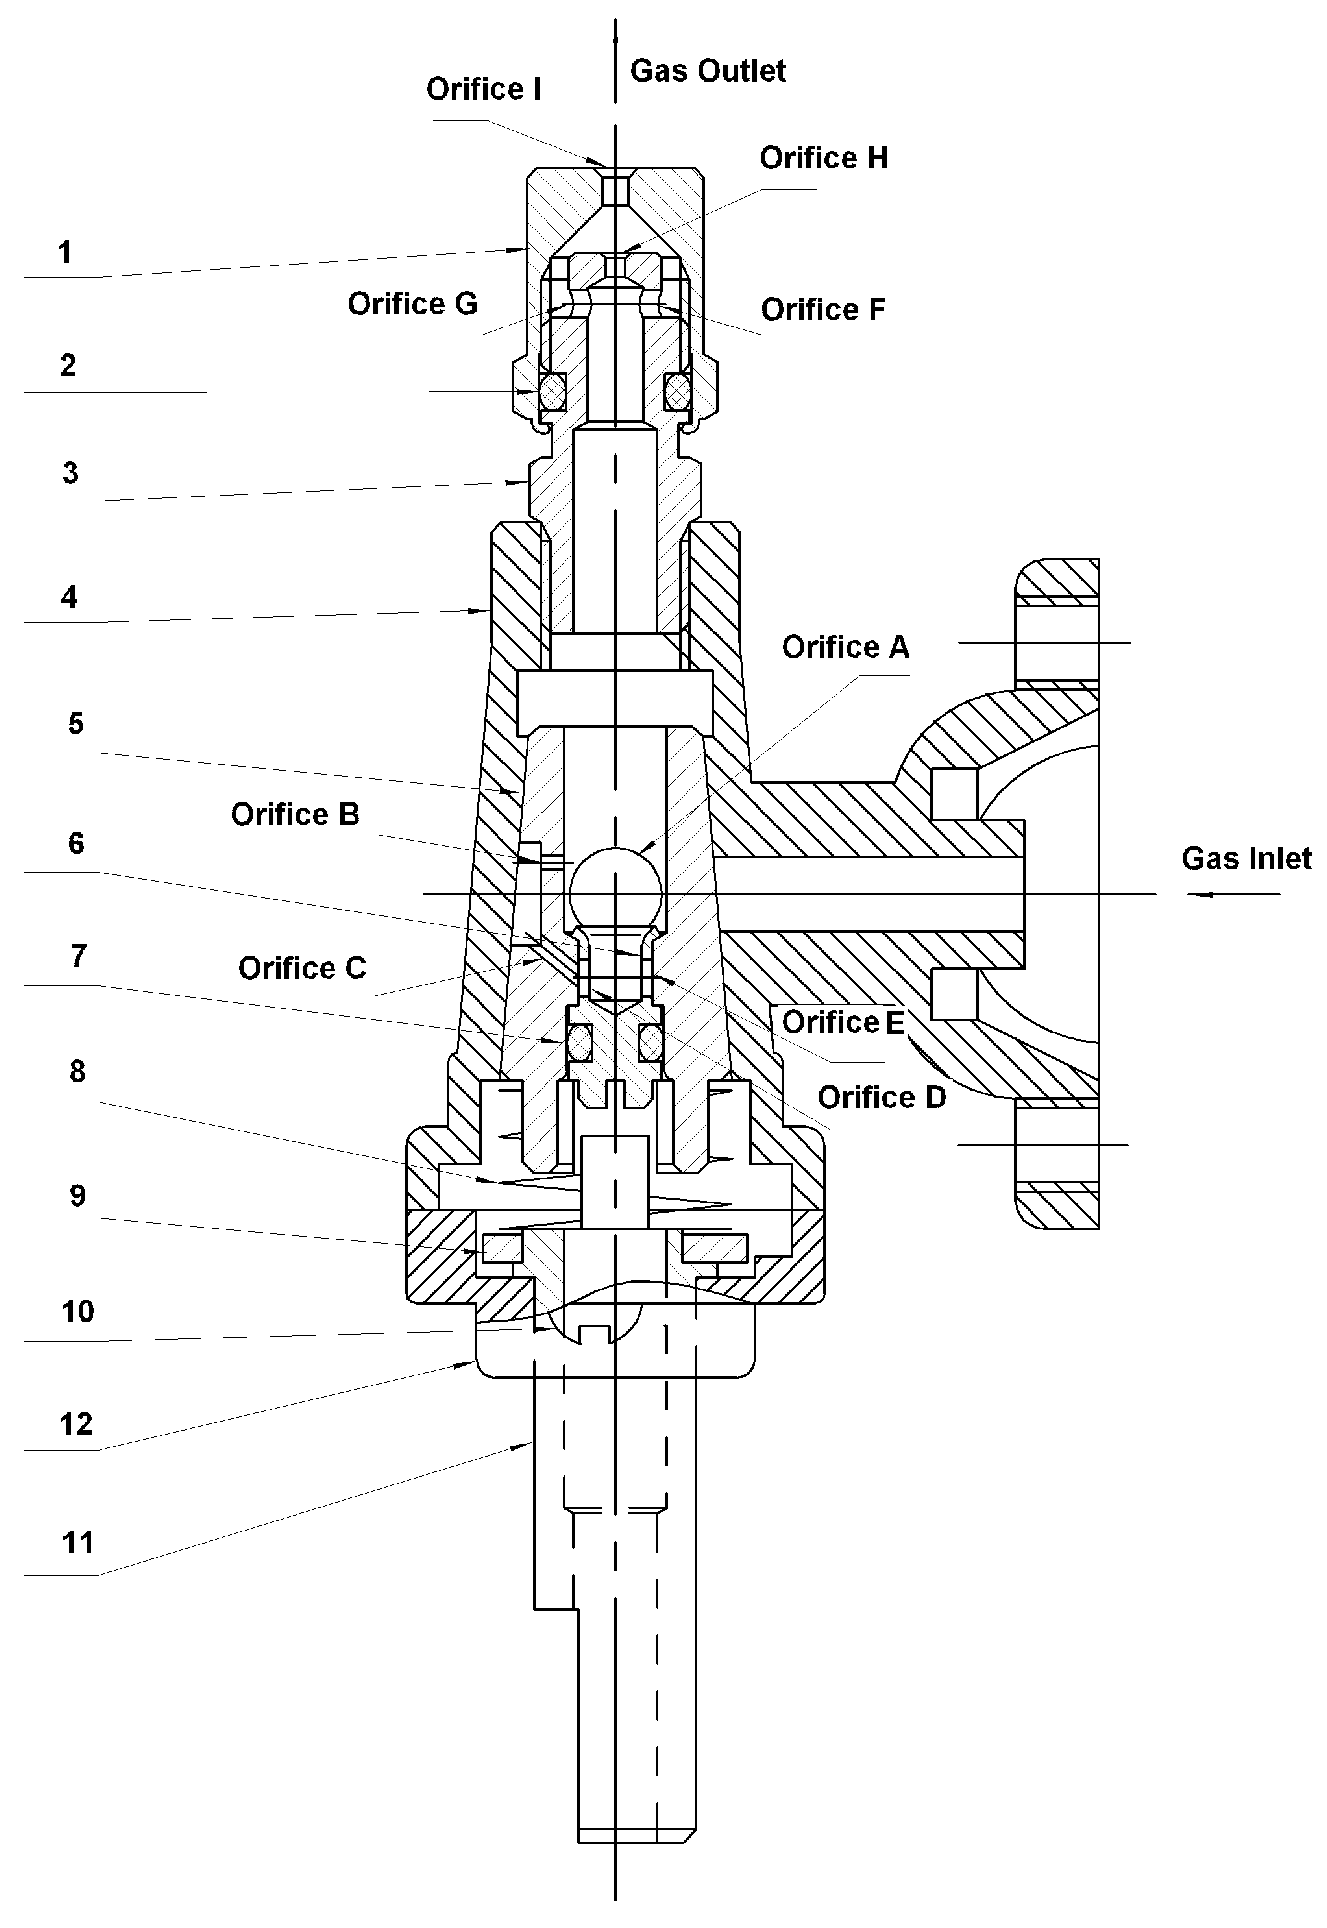 Manual gas valve with natural/LP gas conversion capability